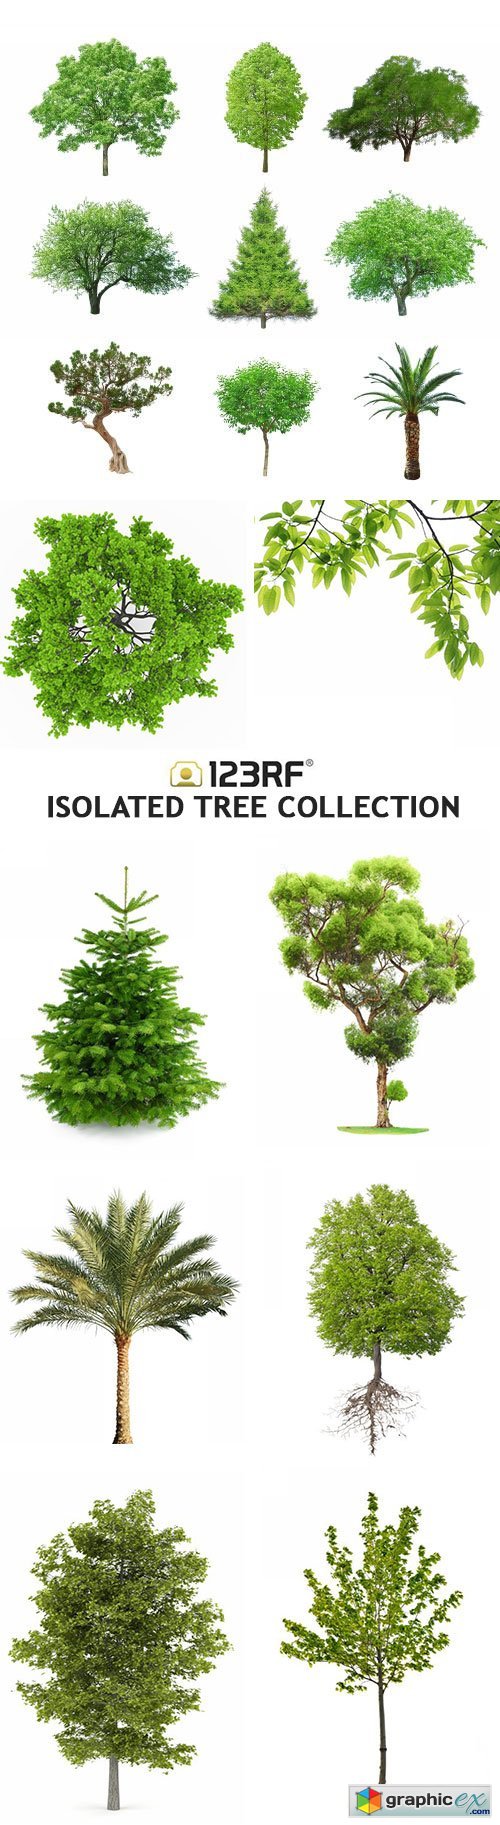 Isolated Tree Collection - 26xJPG